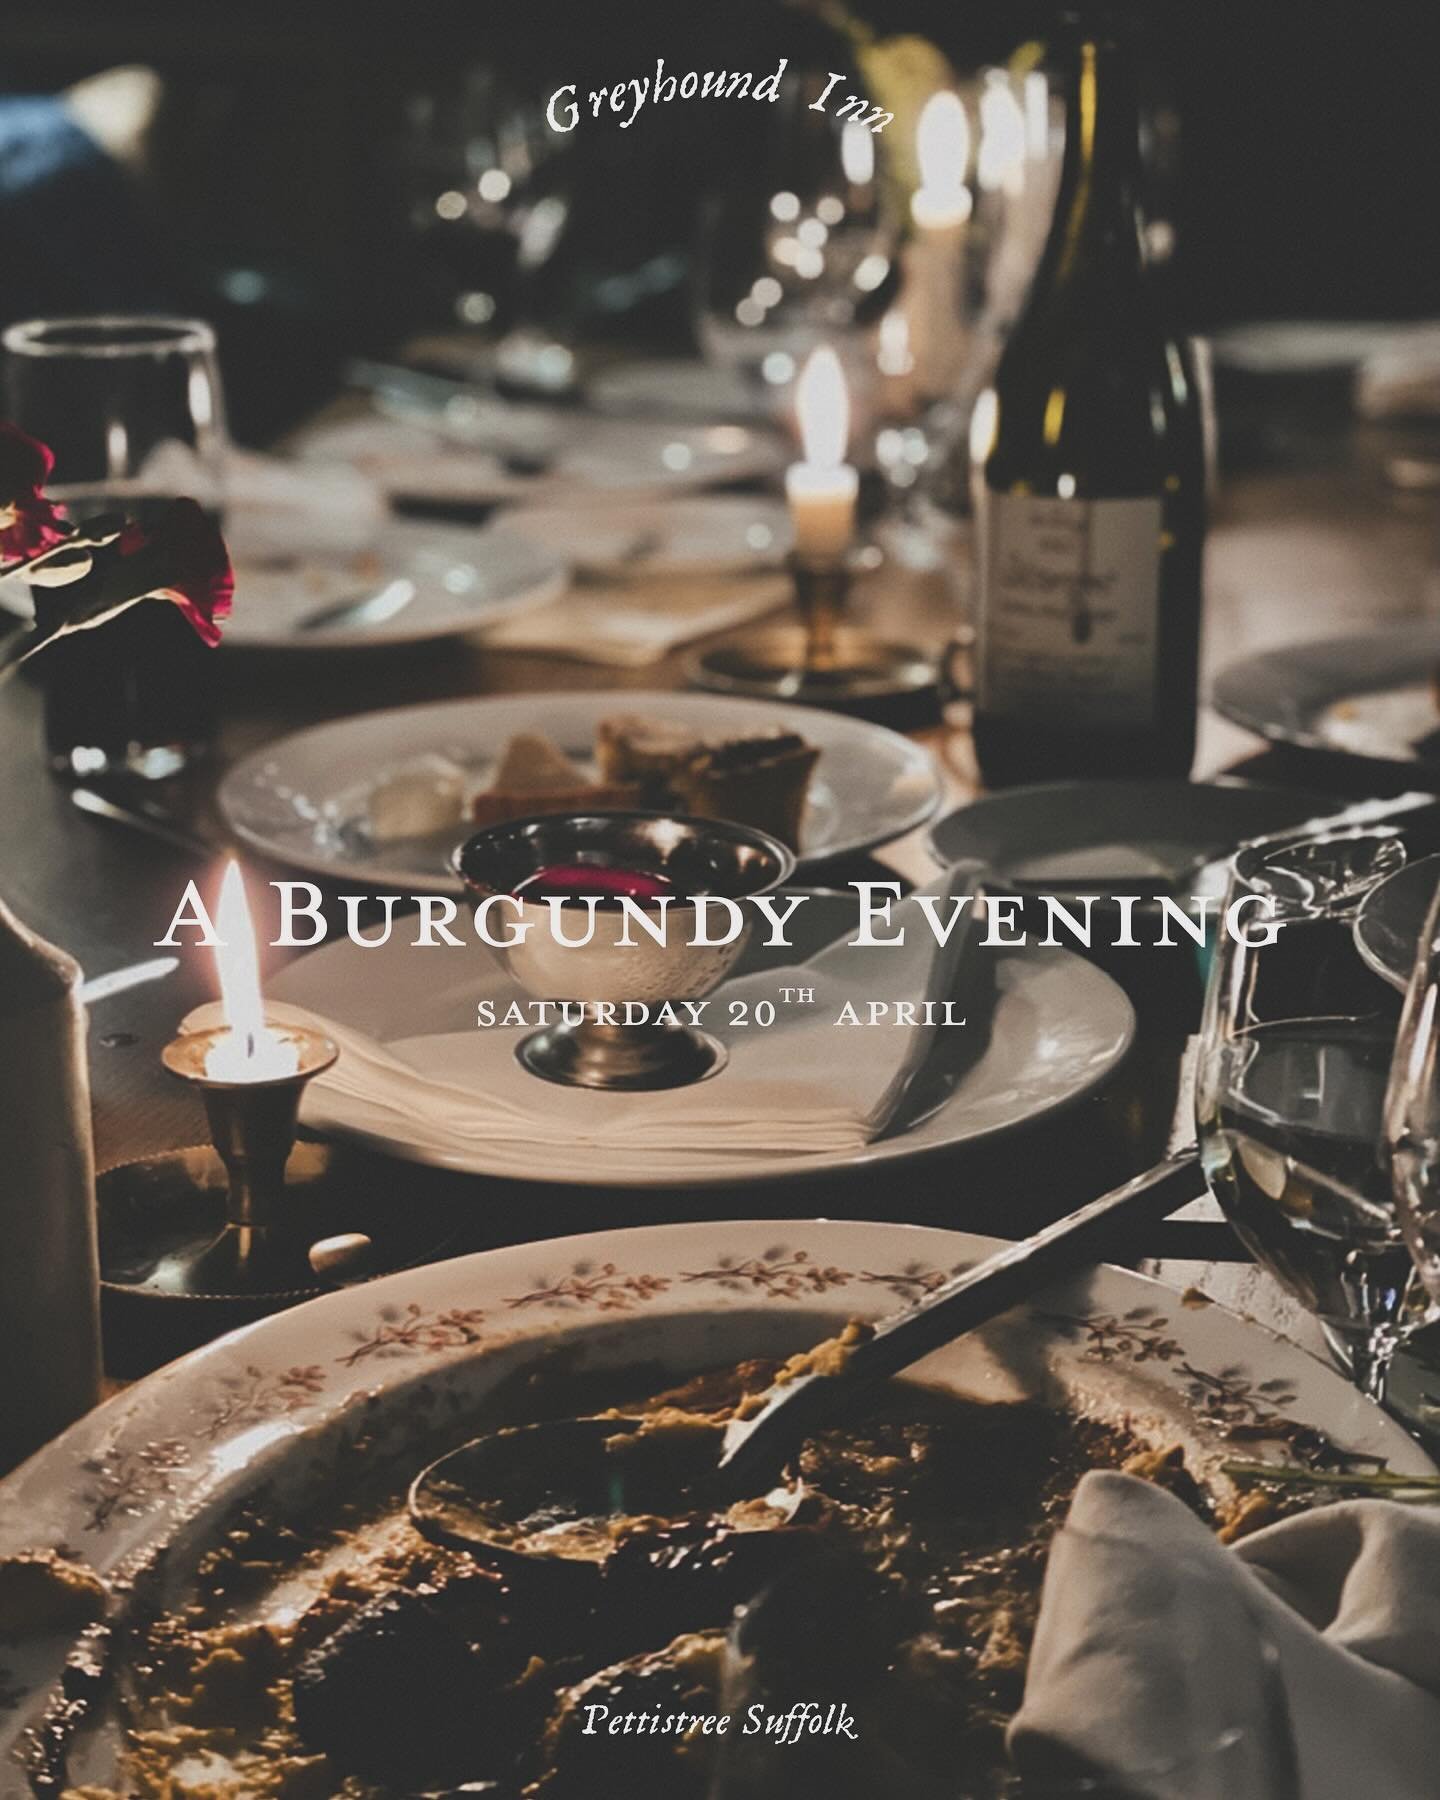 A couple of tables have become available for our Burgundy evening on Saturday 20th April. Please DM or email if you are interested hello@greyhoundpettistree.co.uk

*A Burgundy Evening*

Our good friend, Willie Lebus, formerly Bibendum Wines, has delv